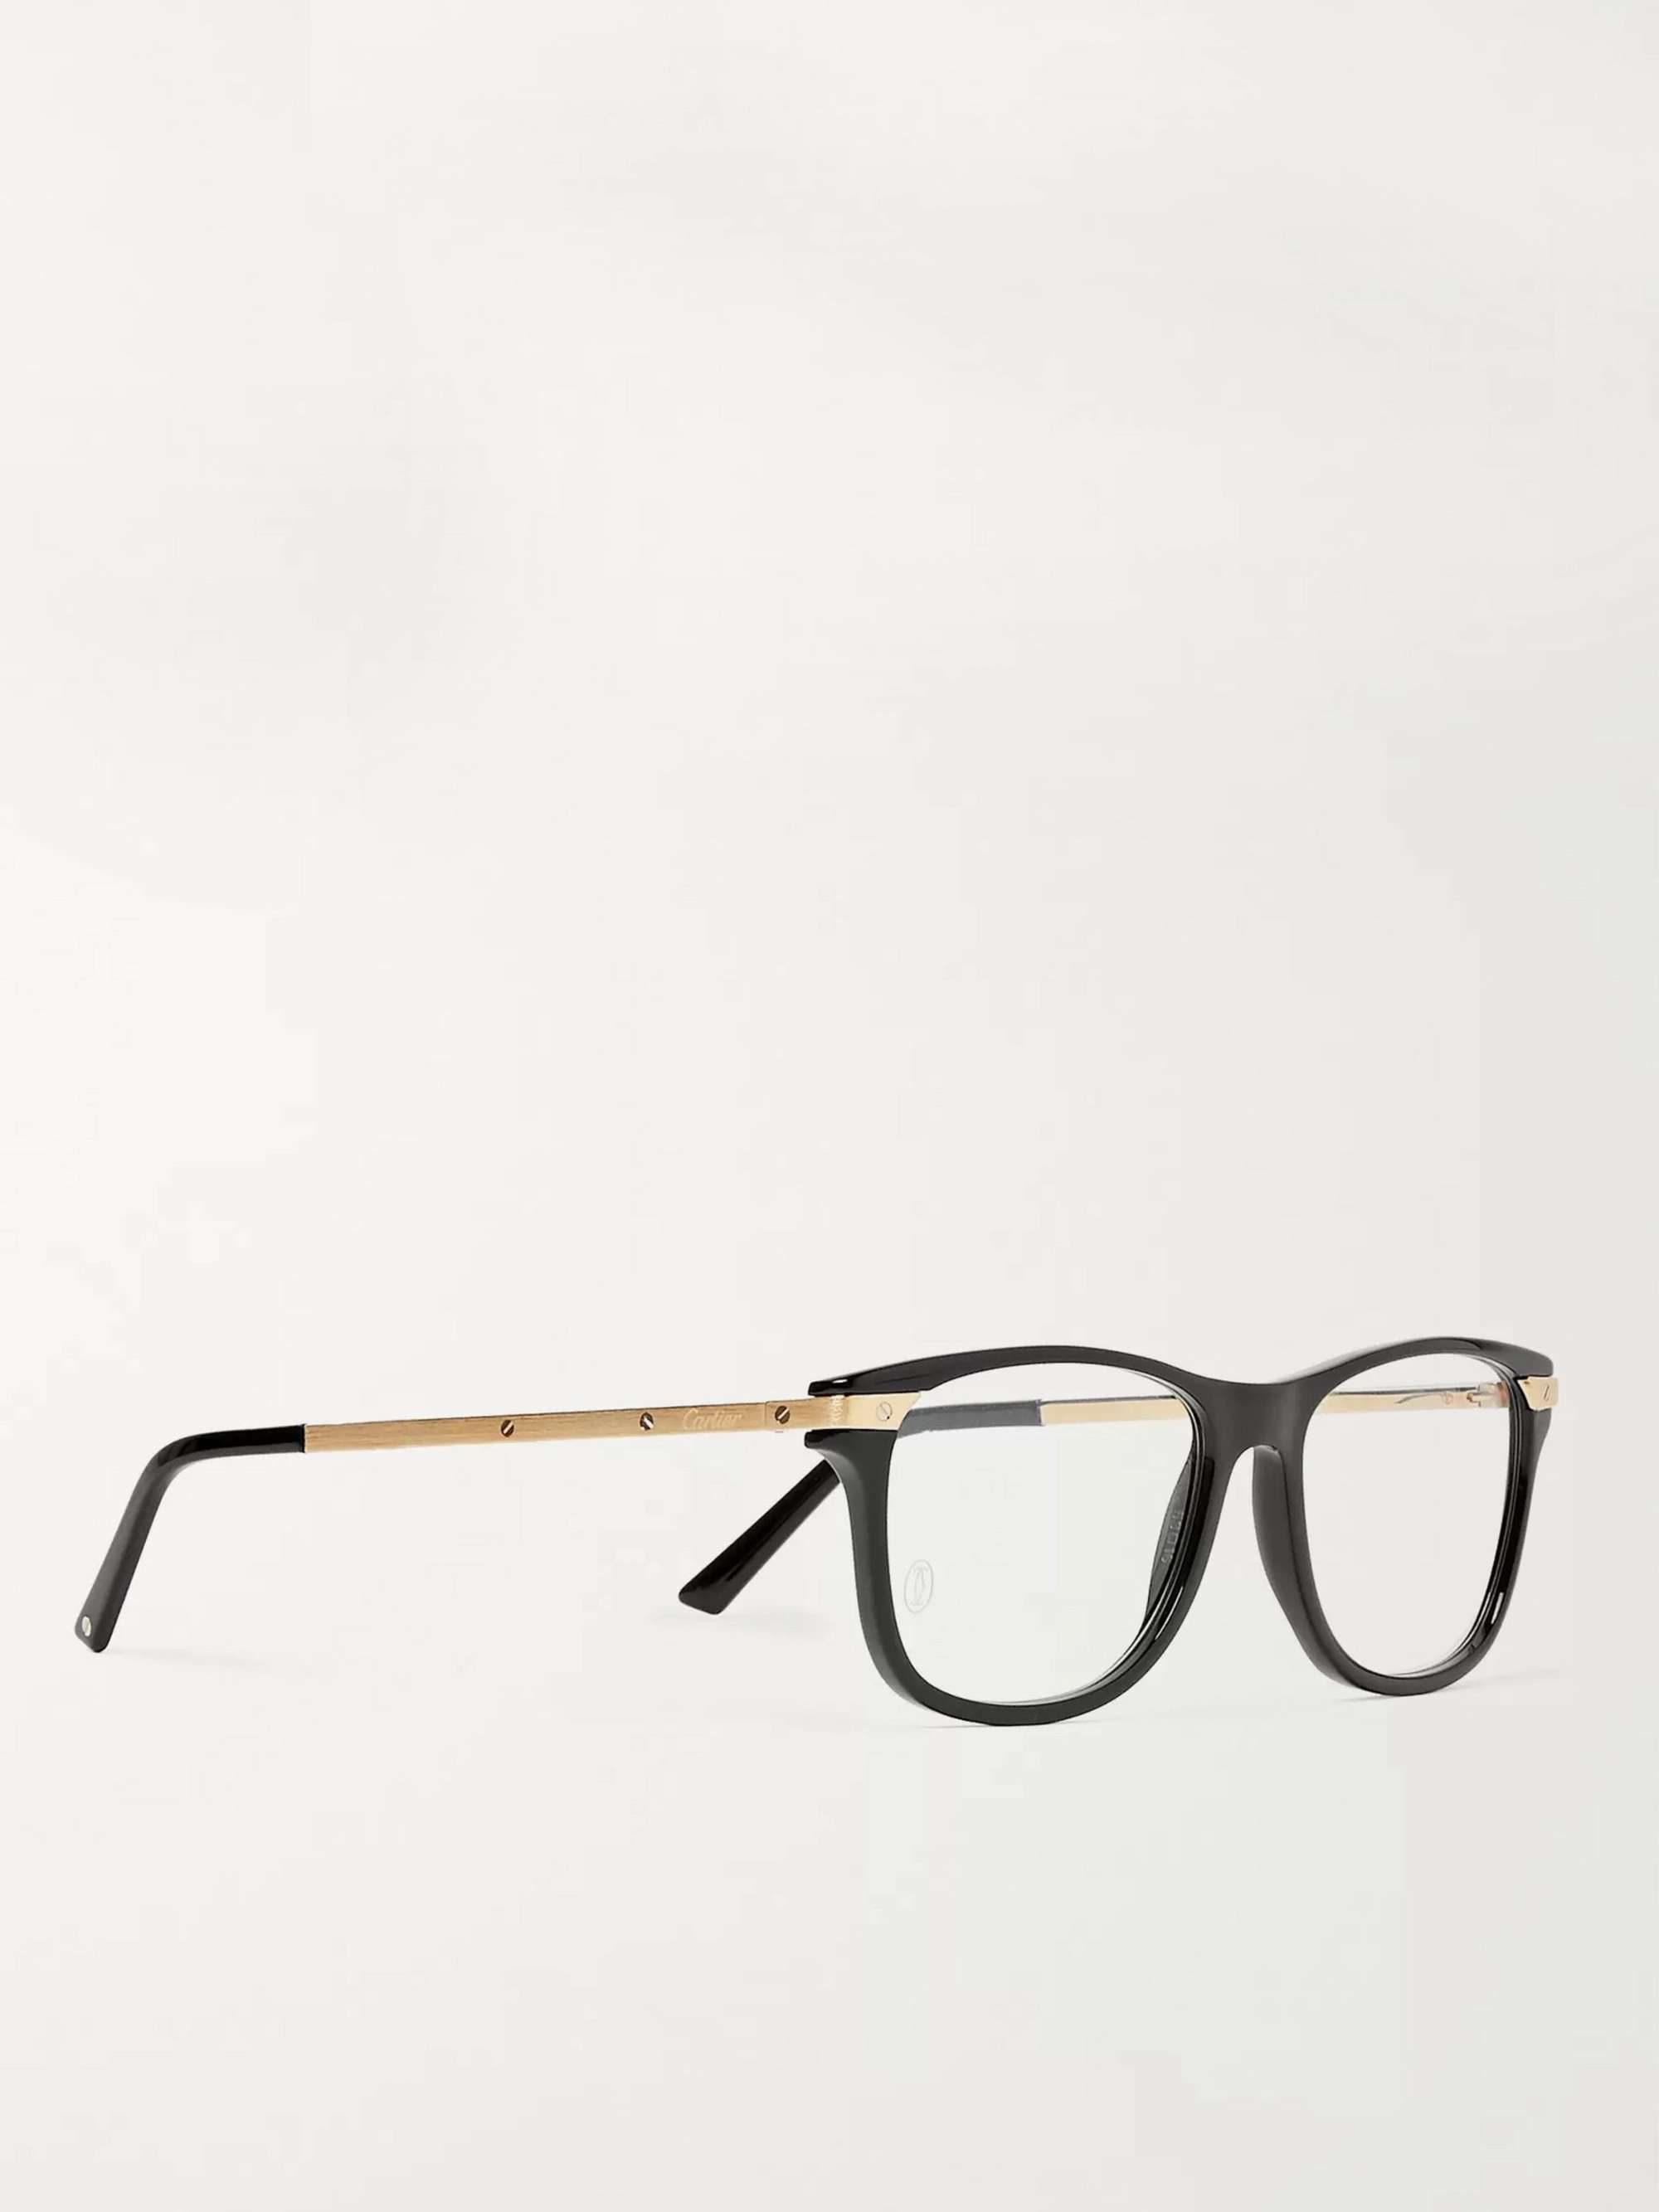 CARTIER EYEWEAR Square-Frame Acetate and Gold-Tone Optical Glasses